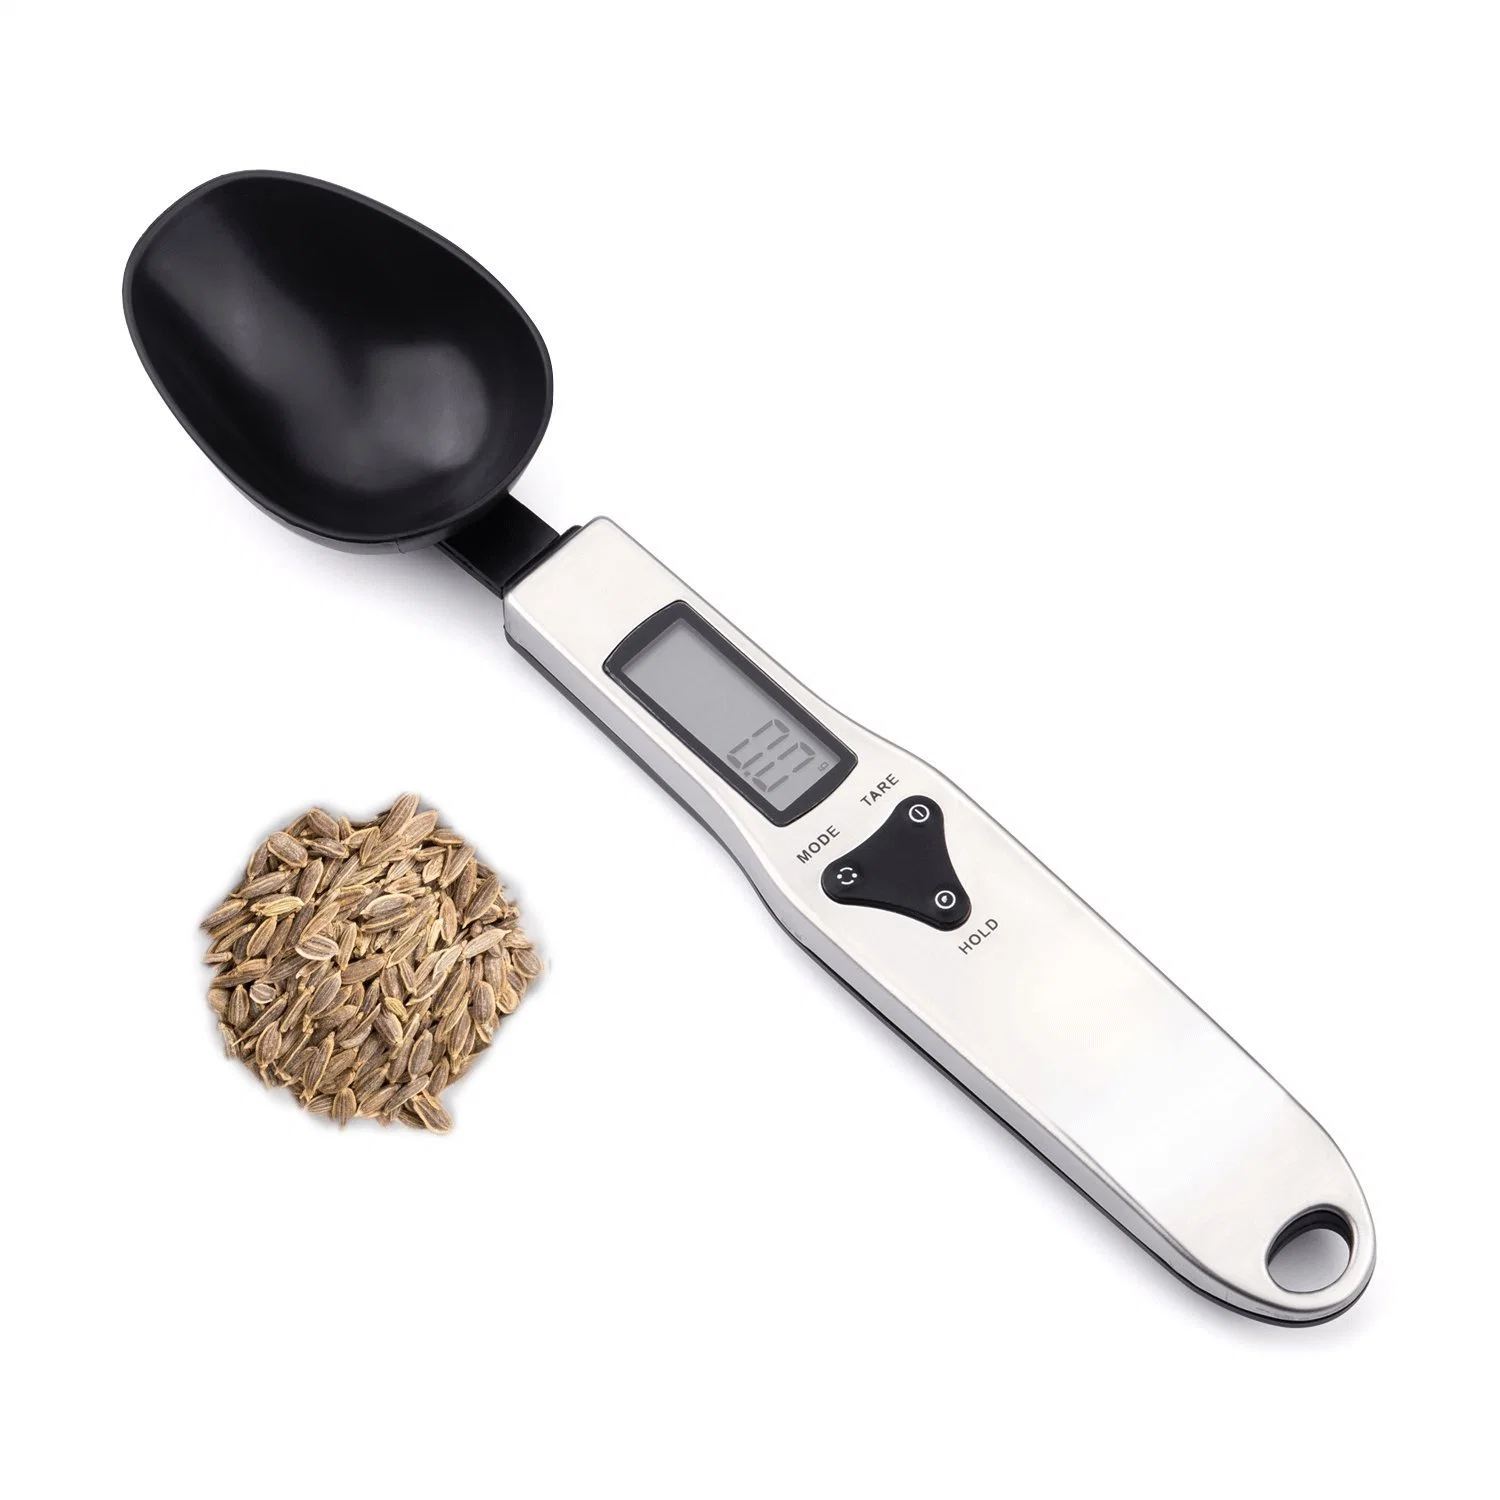 Stainless Steel Handle Portable 500g 0.1g Kitchen Digital Spoon Scale